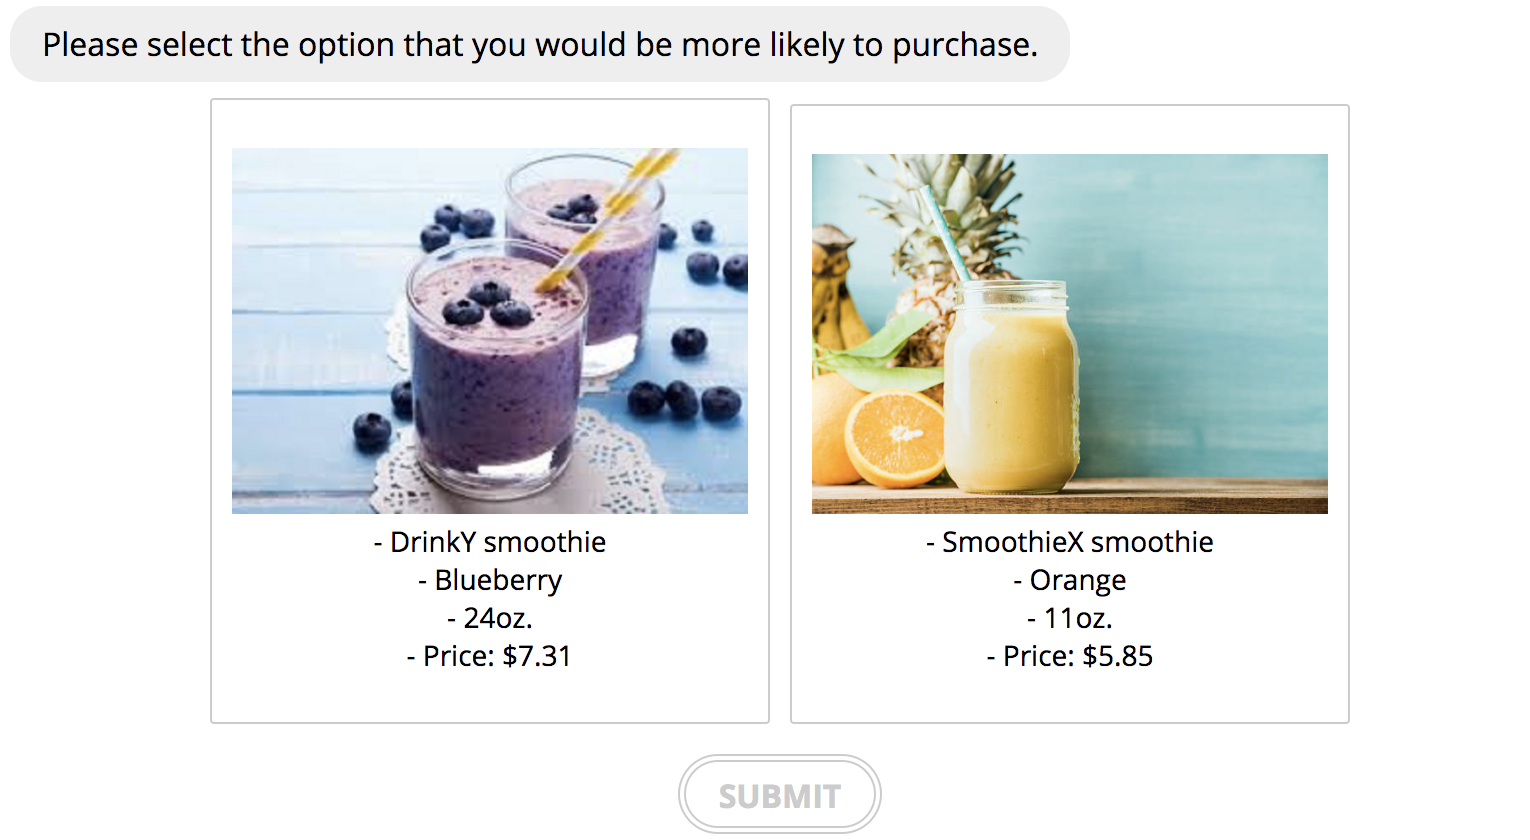 Respondent view of a discrete choice survey question comparing two smoothie products